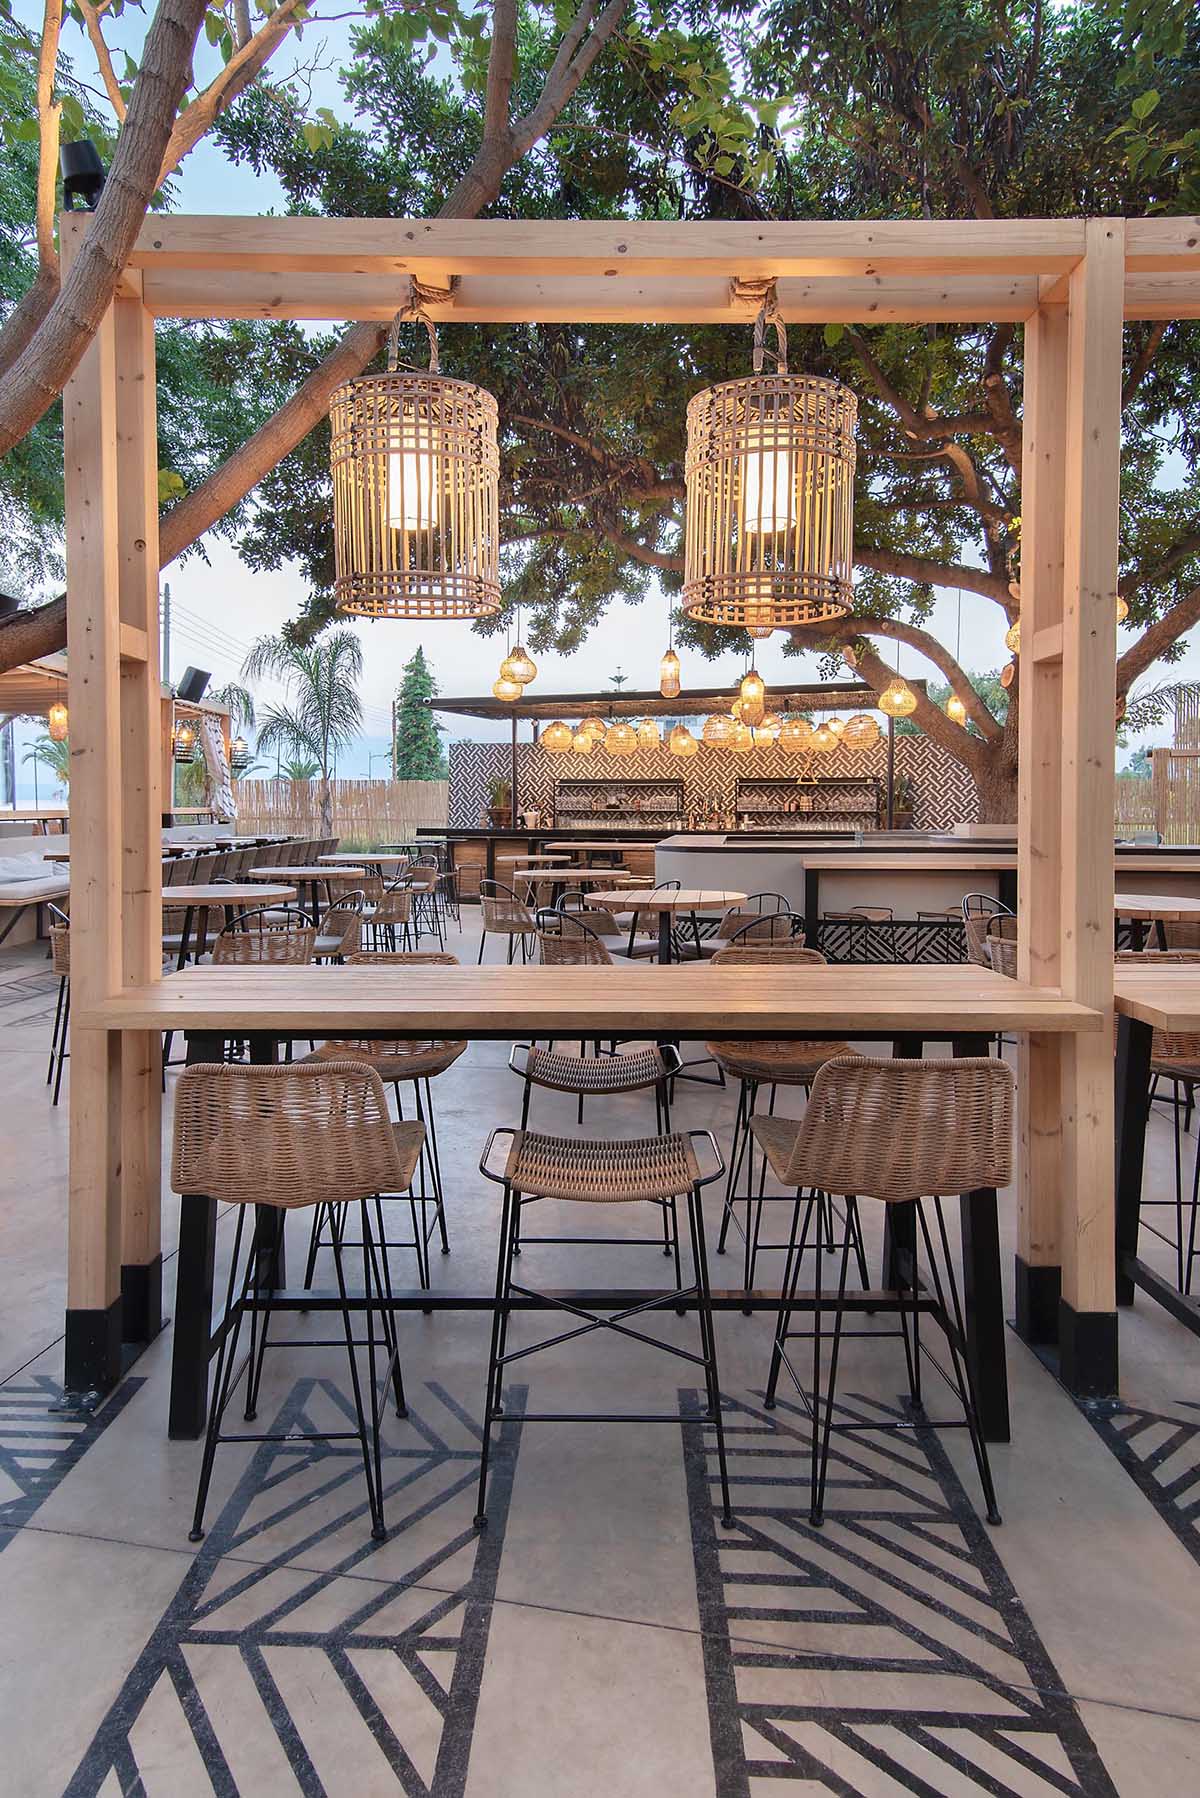 This restaurant and bar has a beach aesthetic that was created with reed screens, lighting, and decor.